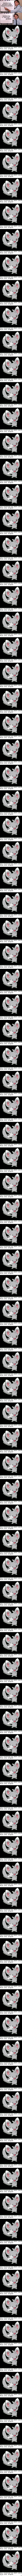 Man the idiot card probem is bad! | image tagged in you received an idiot card | made w/ Imgflip meme maker